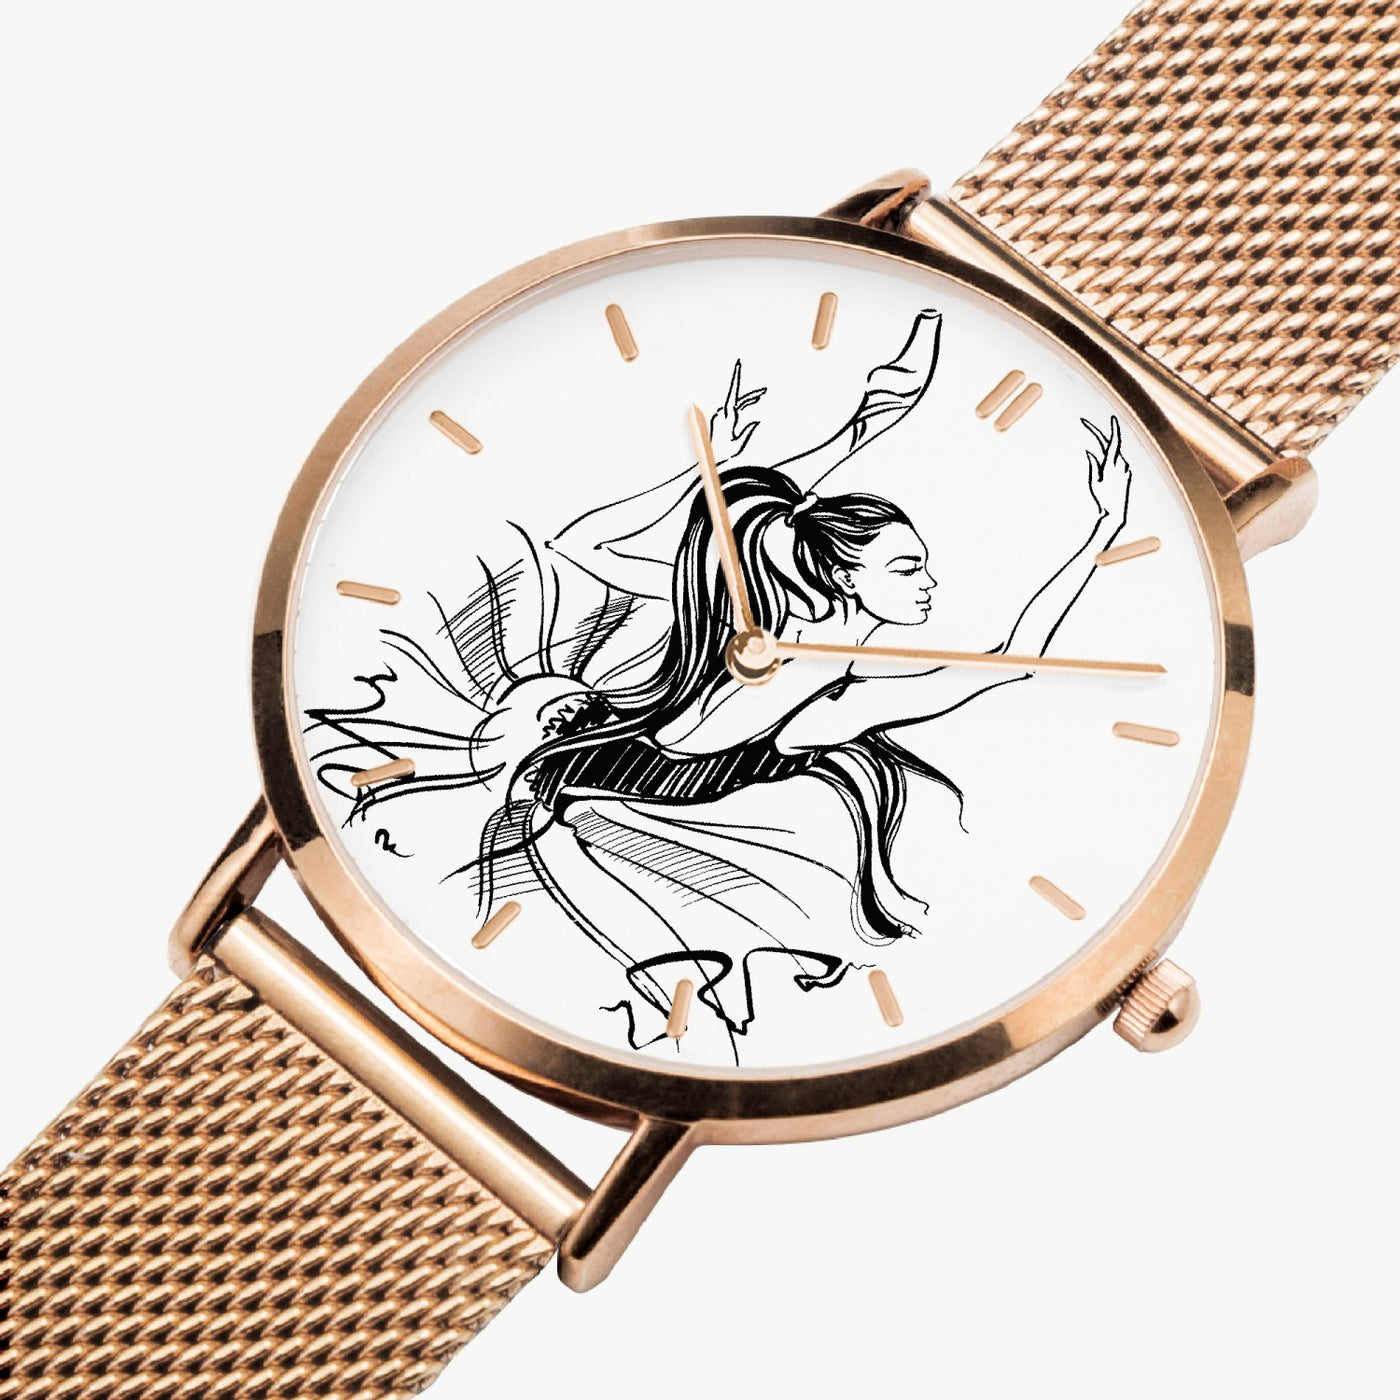 Ballerina - Fashion Ultra-thin Stainless Steel Quartz Watch (With Indicators)